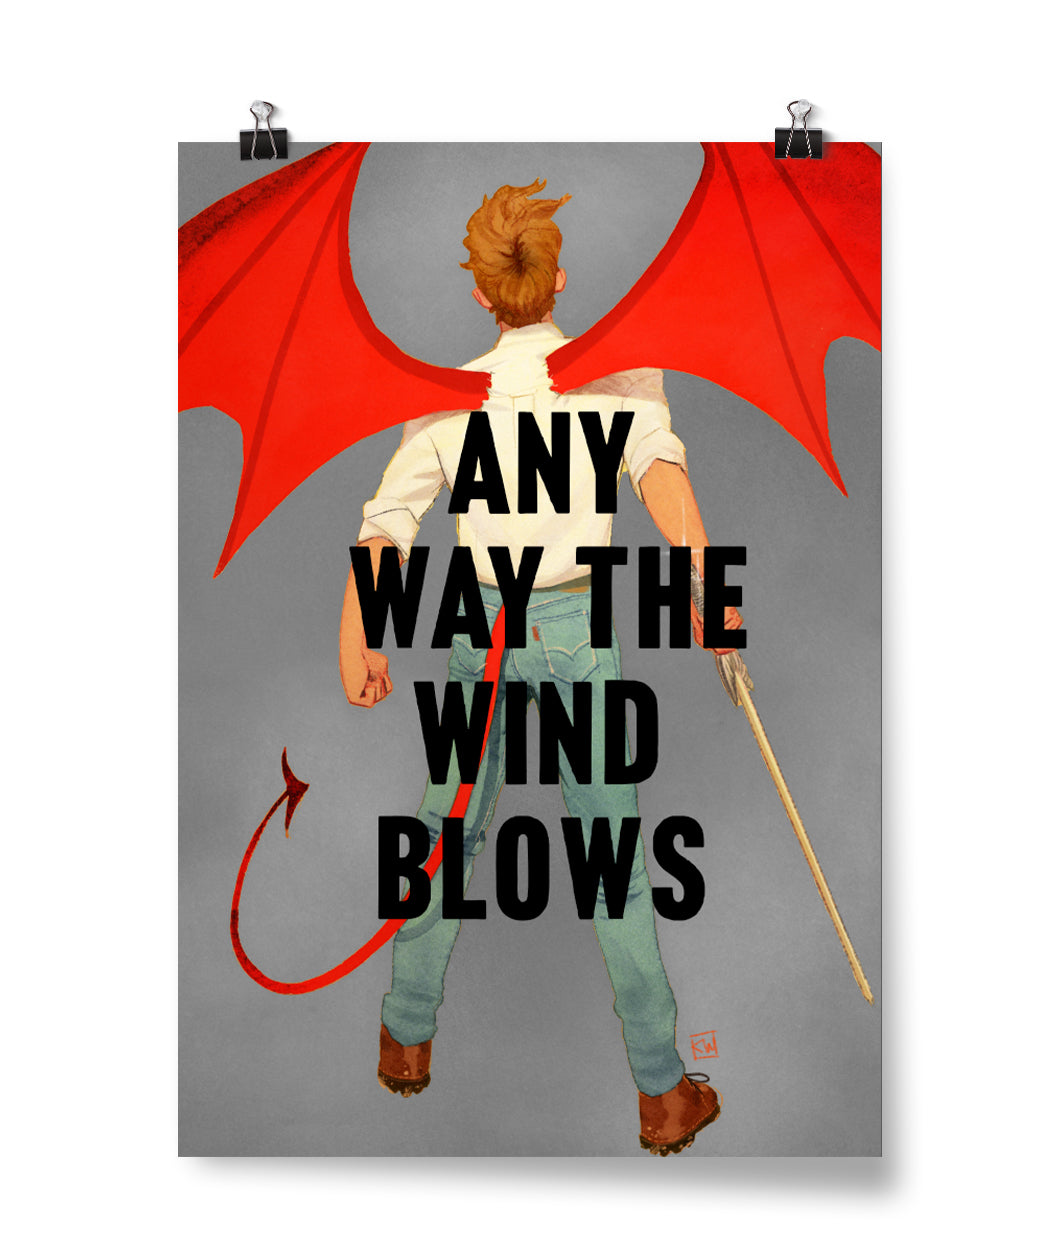 Any Way the Wind Blows by Seanan McGuire